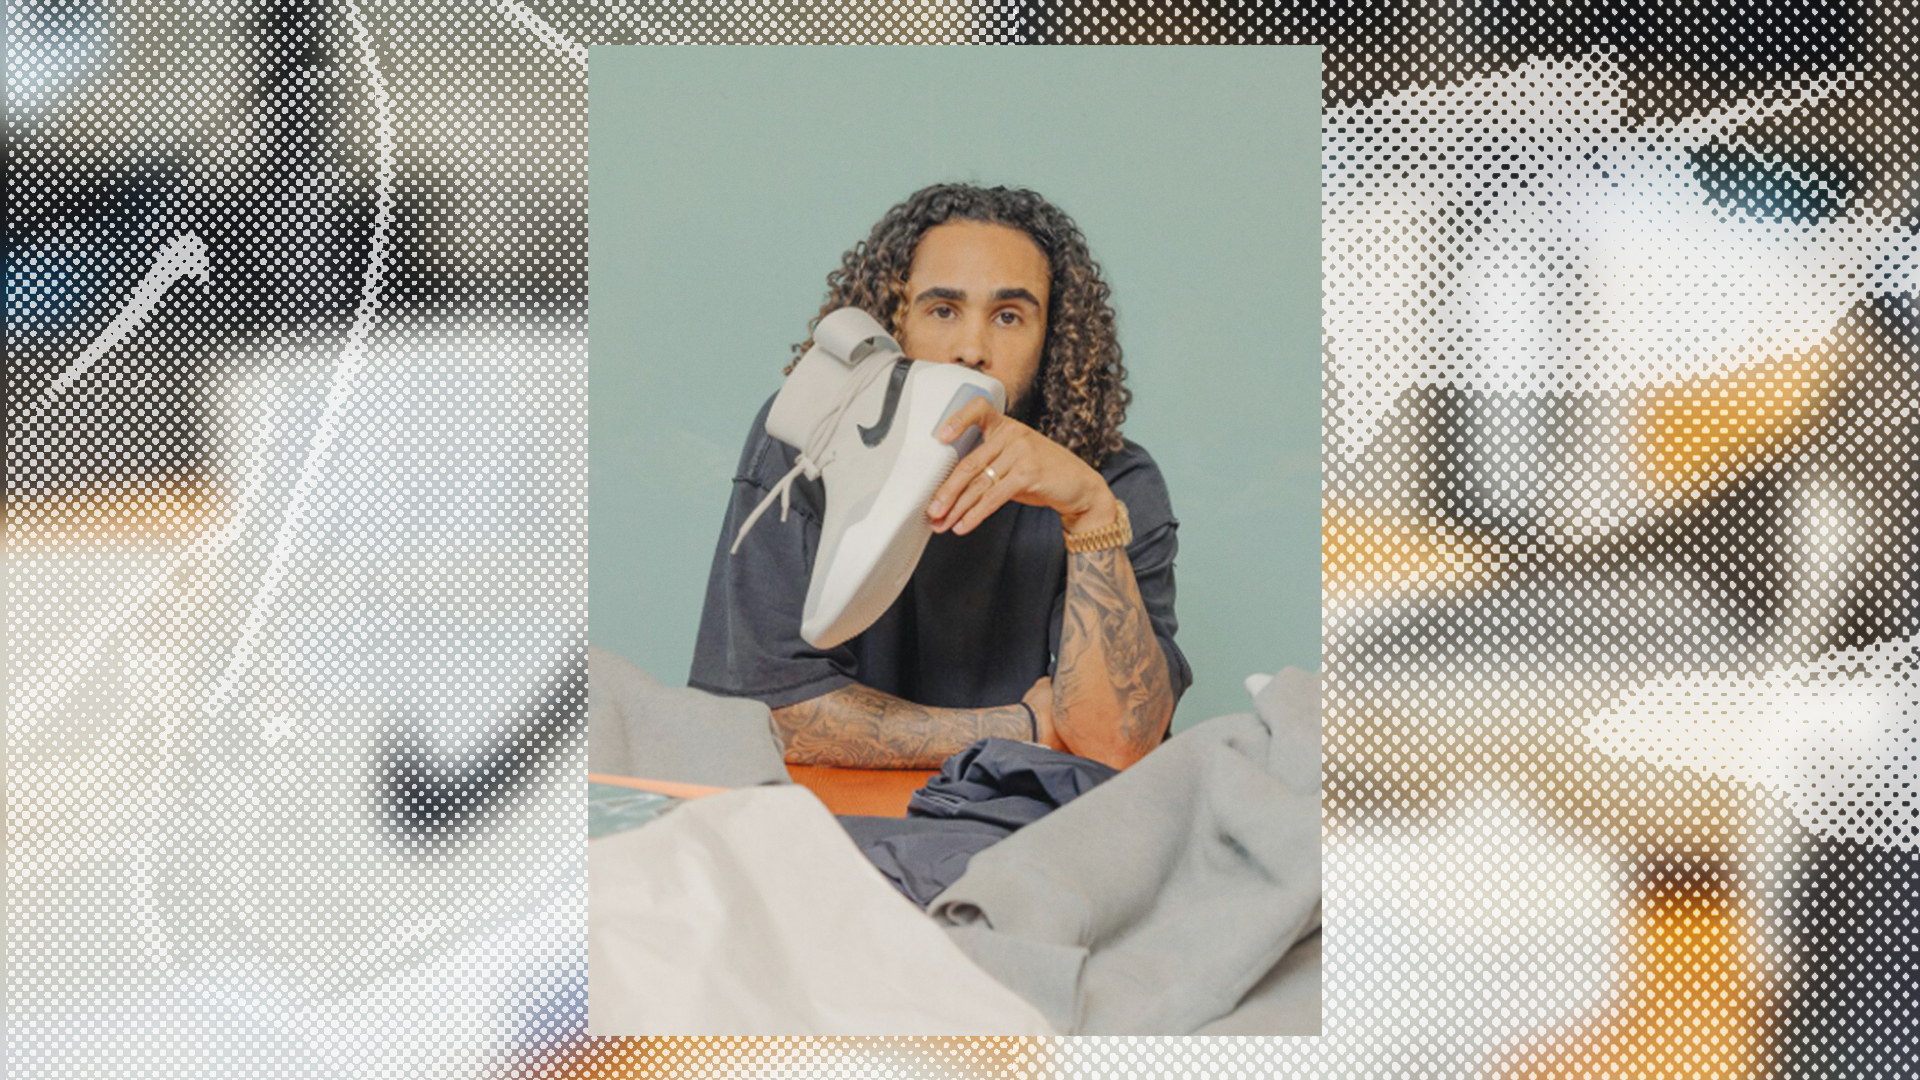 Jerry Lorenzo on the Nike Air Fear of God Collection - Sneaker Freaker